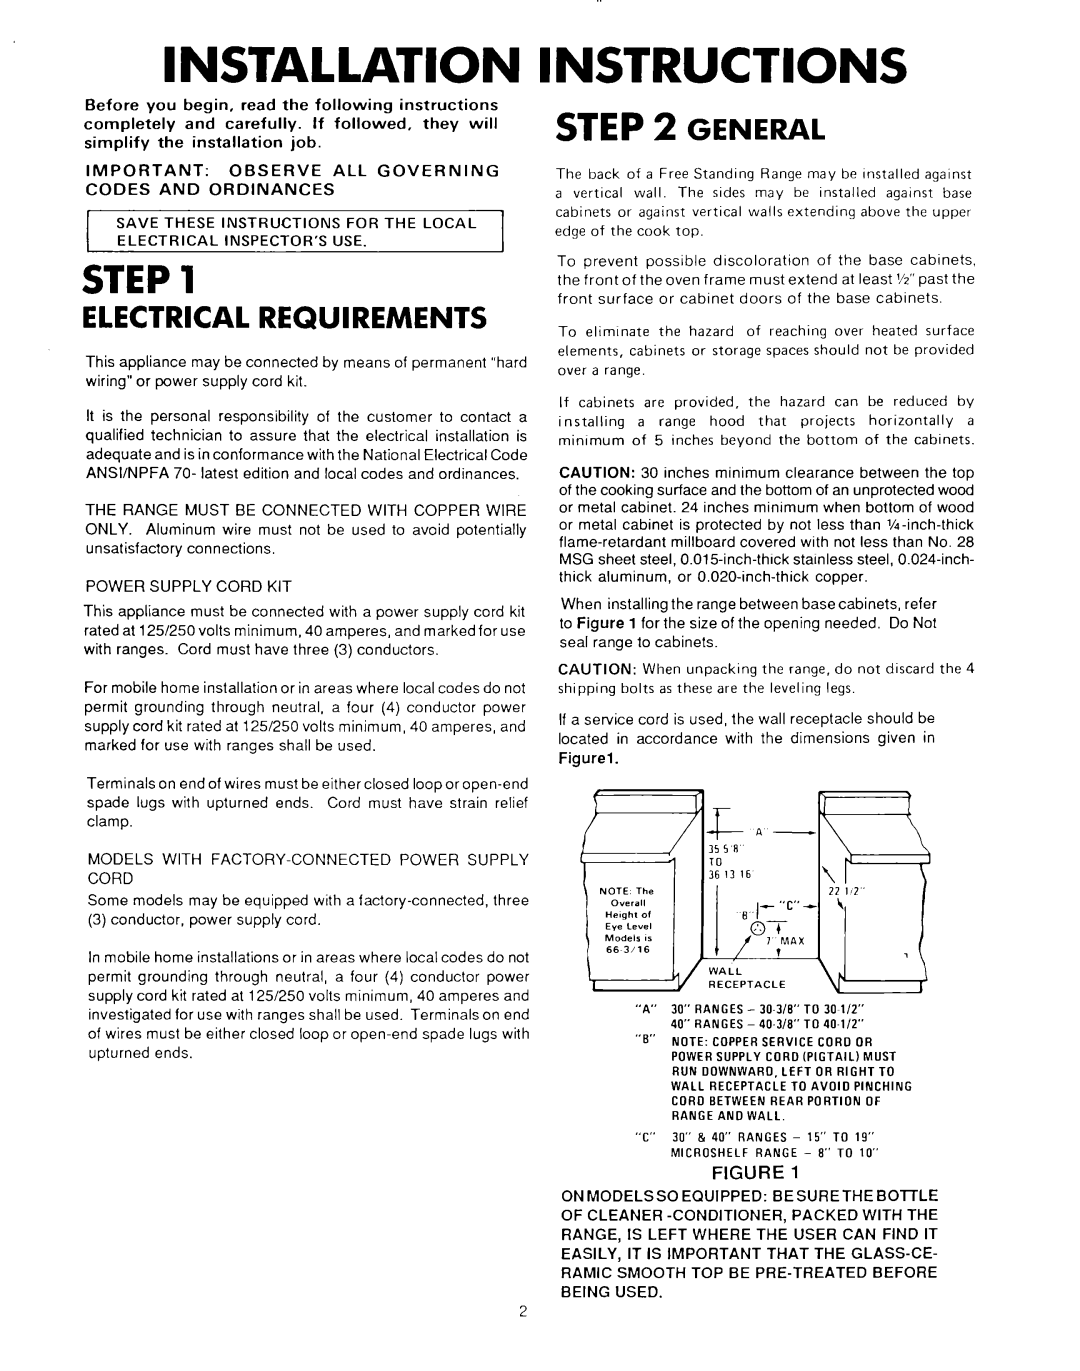 Whirlpool 56OSOLSPC5 816412 manual Step, General, Electrical Requirements, Installation, Instructions 